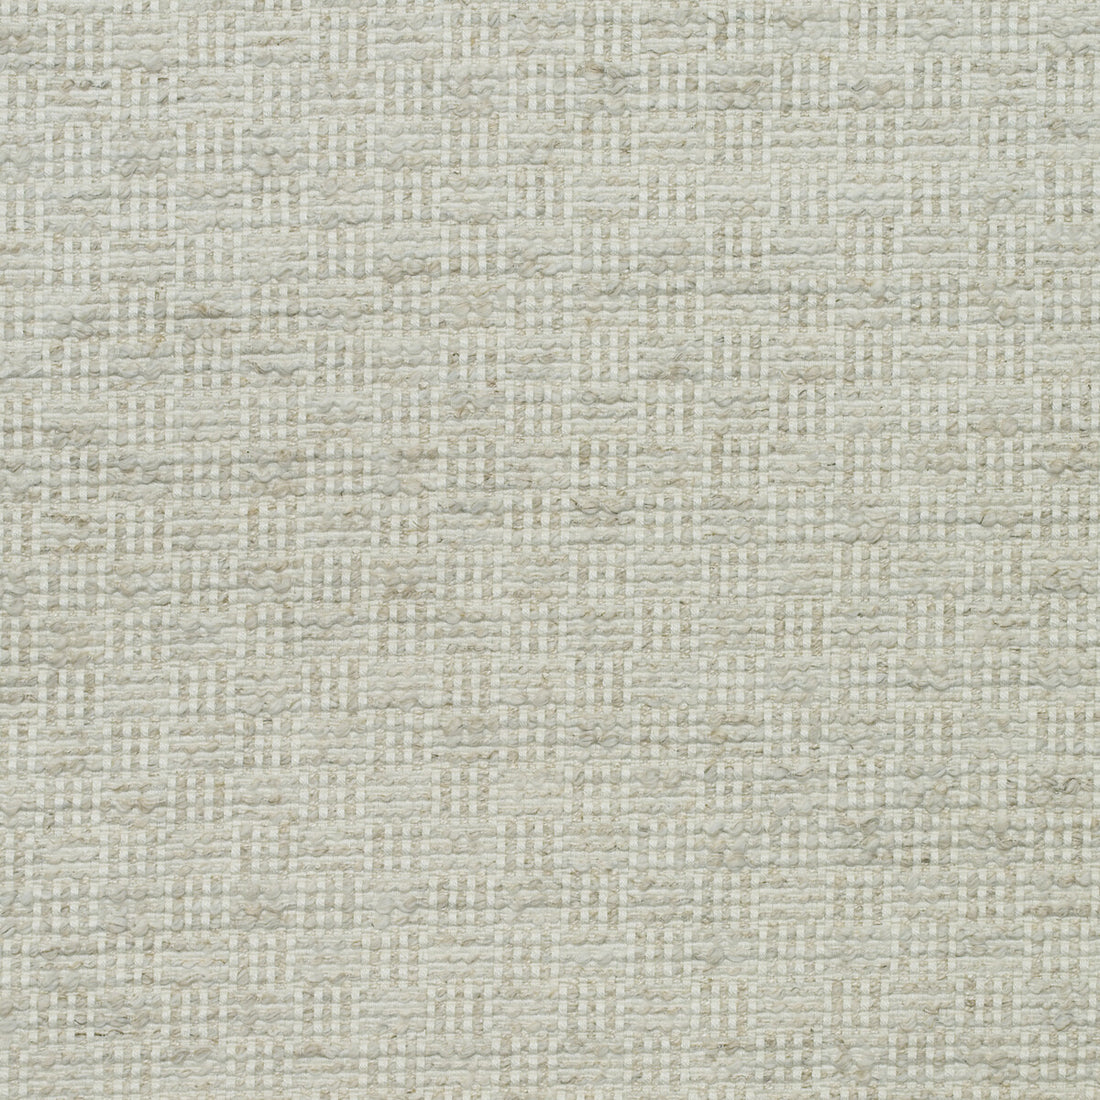 Flint fabric in stone color - pattern AM100395.106.0 - by Kravet Couture in the Andrew Martin Woodland By Sophie Paterson collection